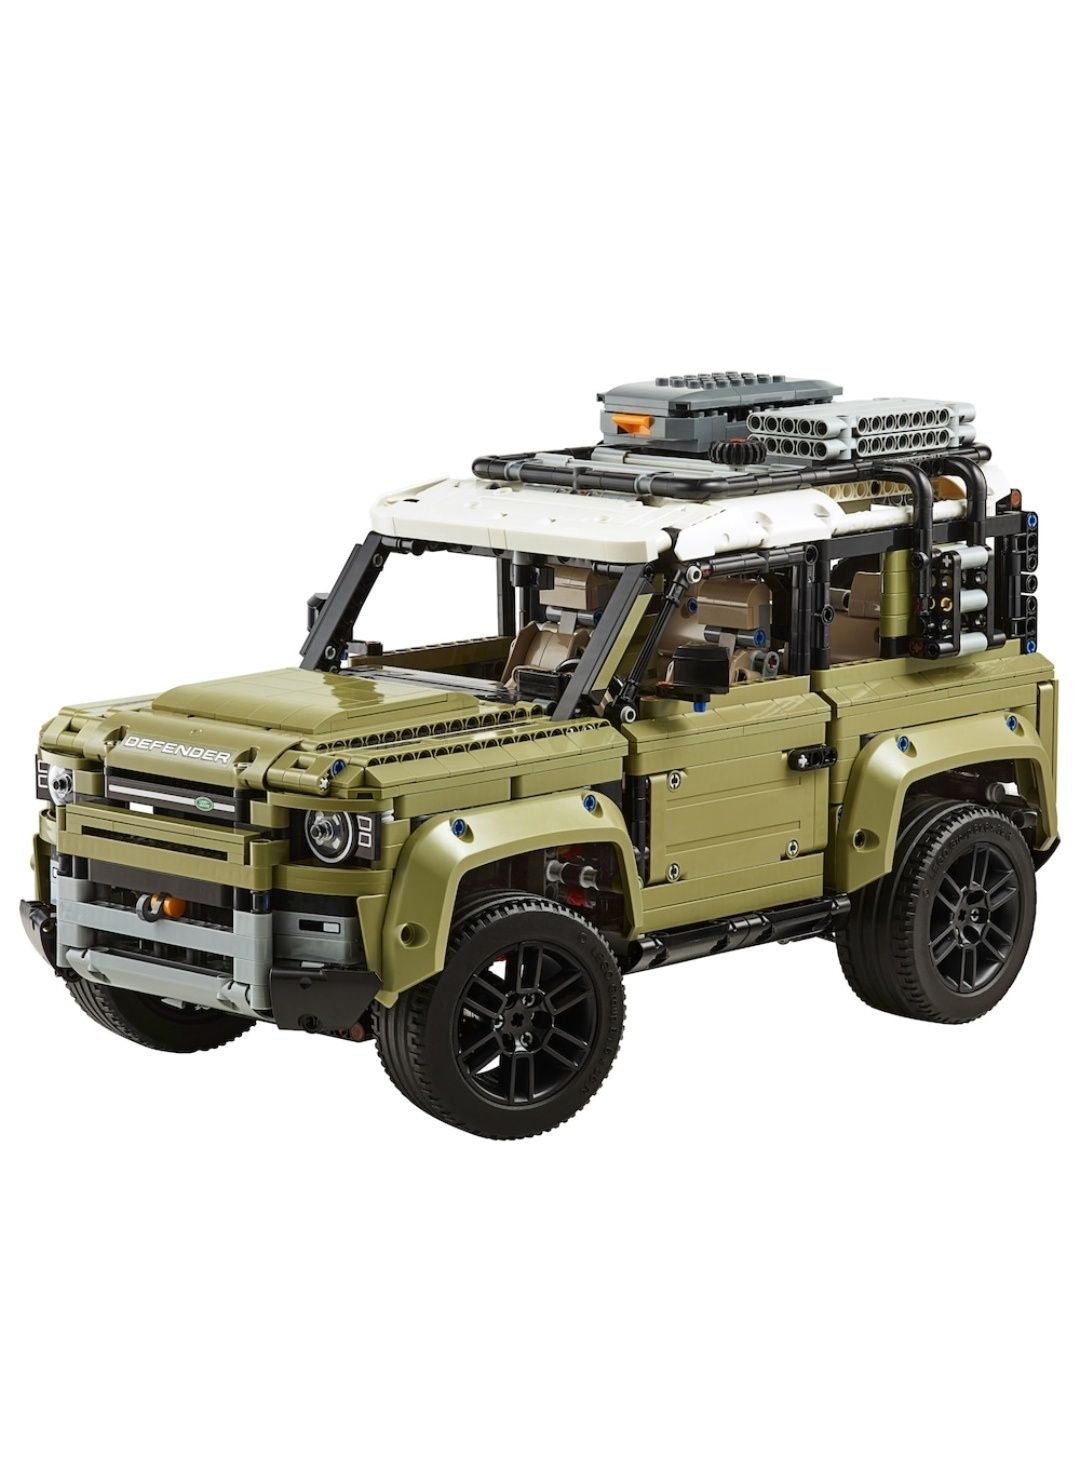 LEGO Technic - Land Rover Defender 42110, 2573 piese